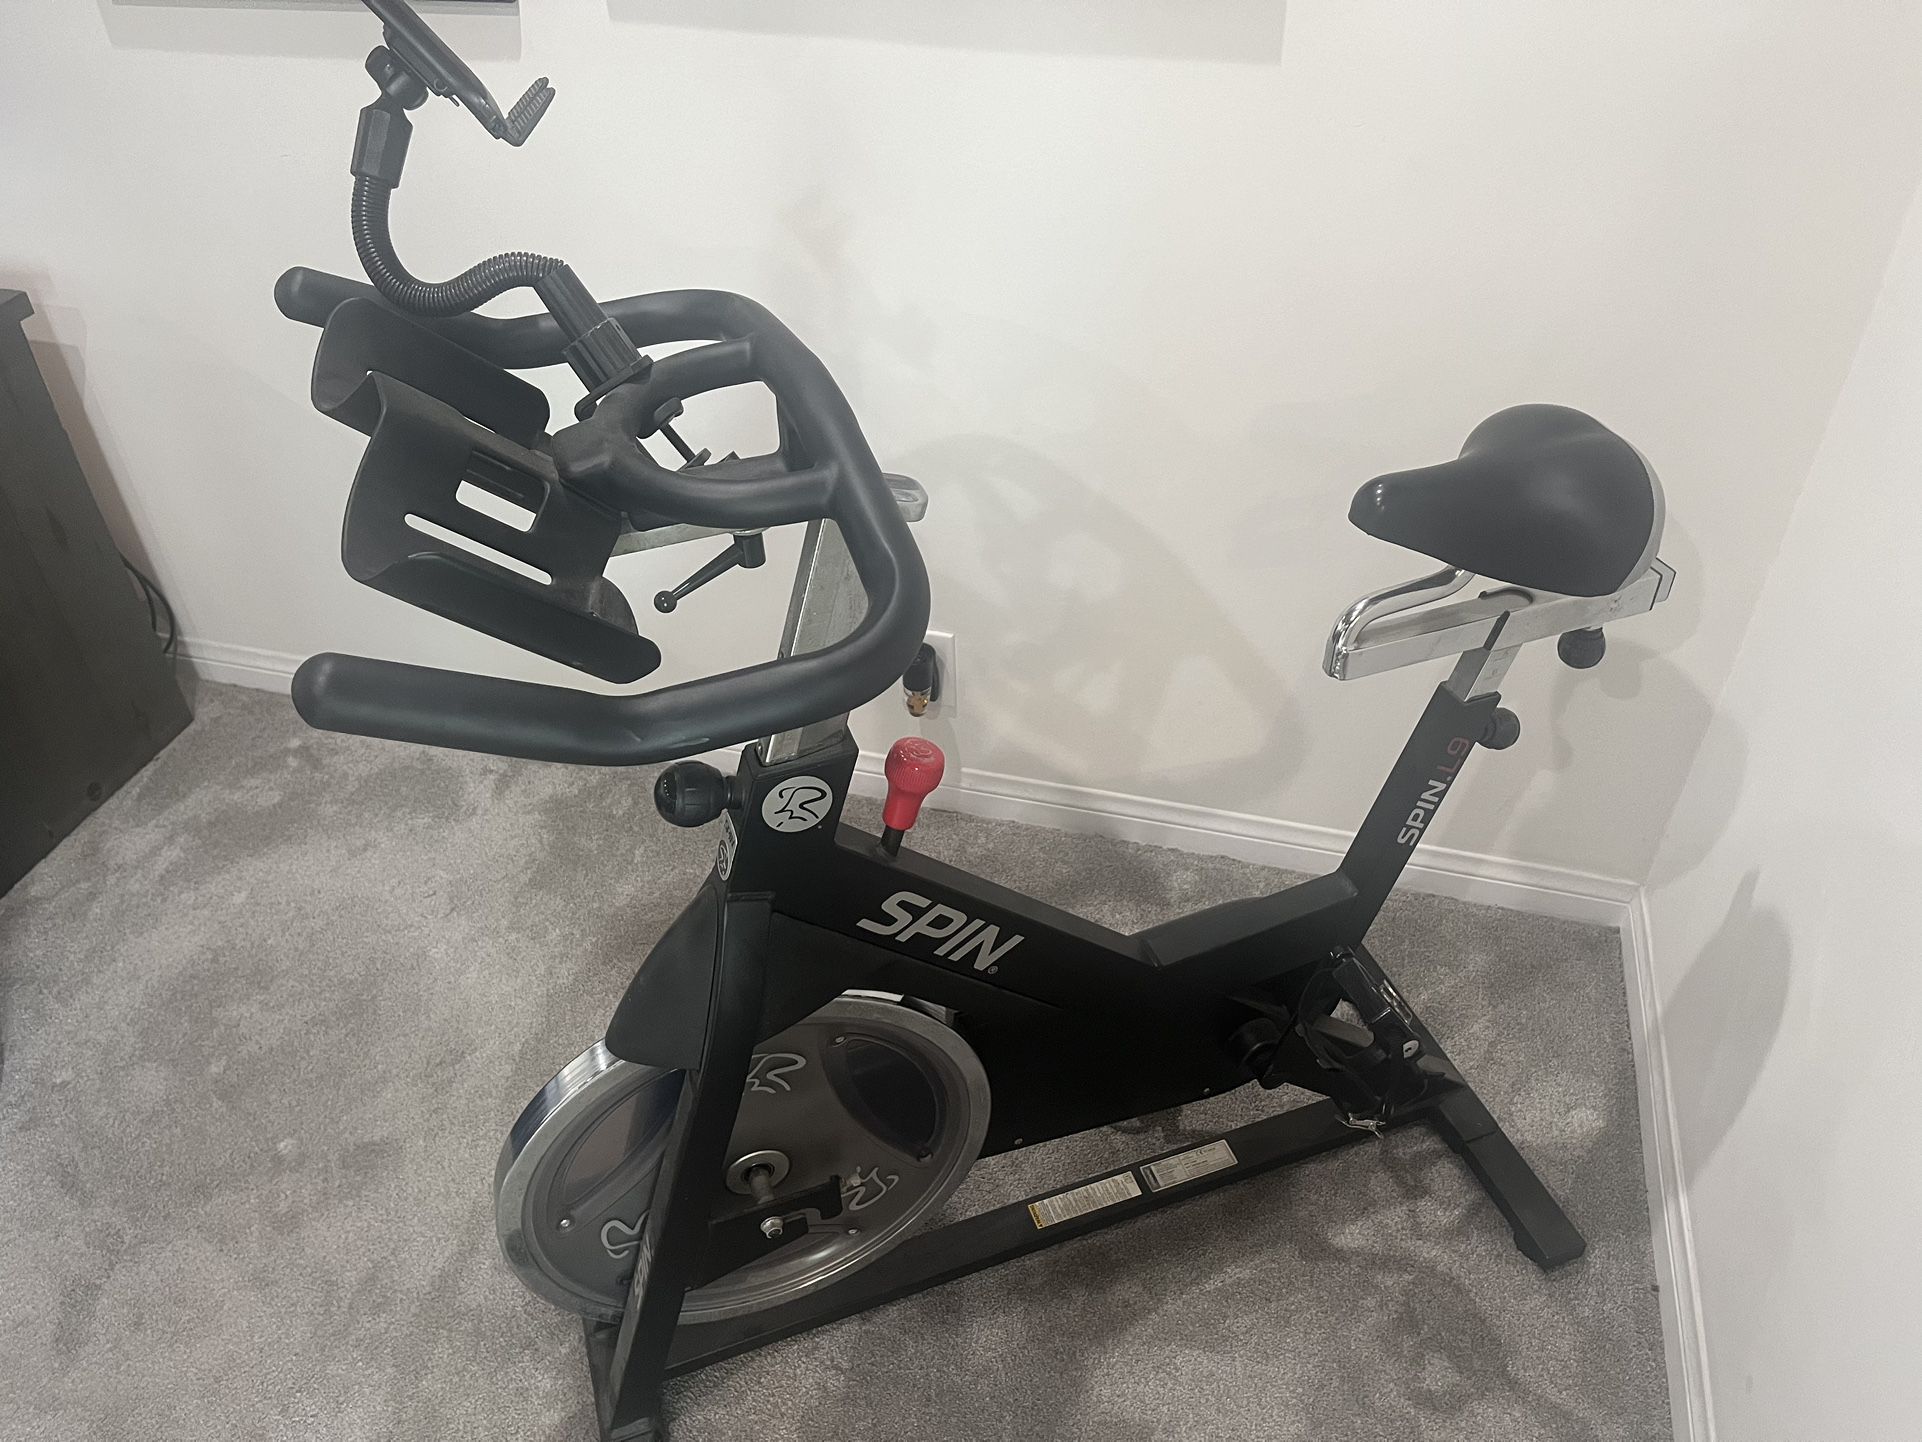 Spinning Exercise Bike (Lifestyle Series)